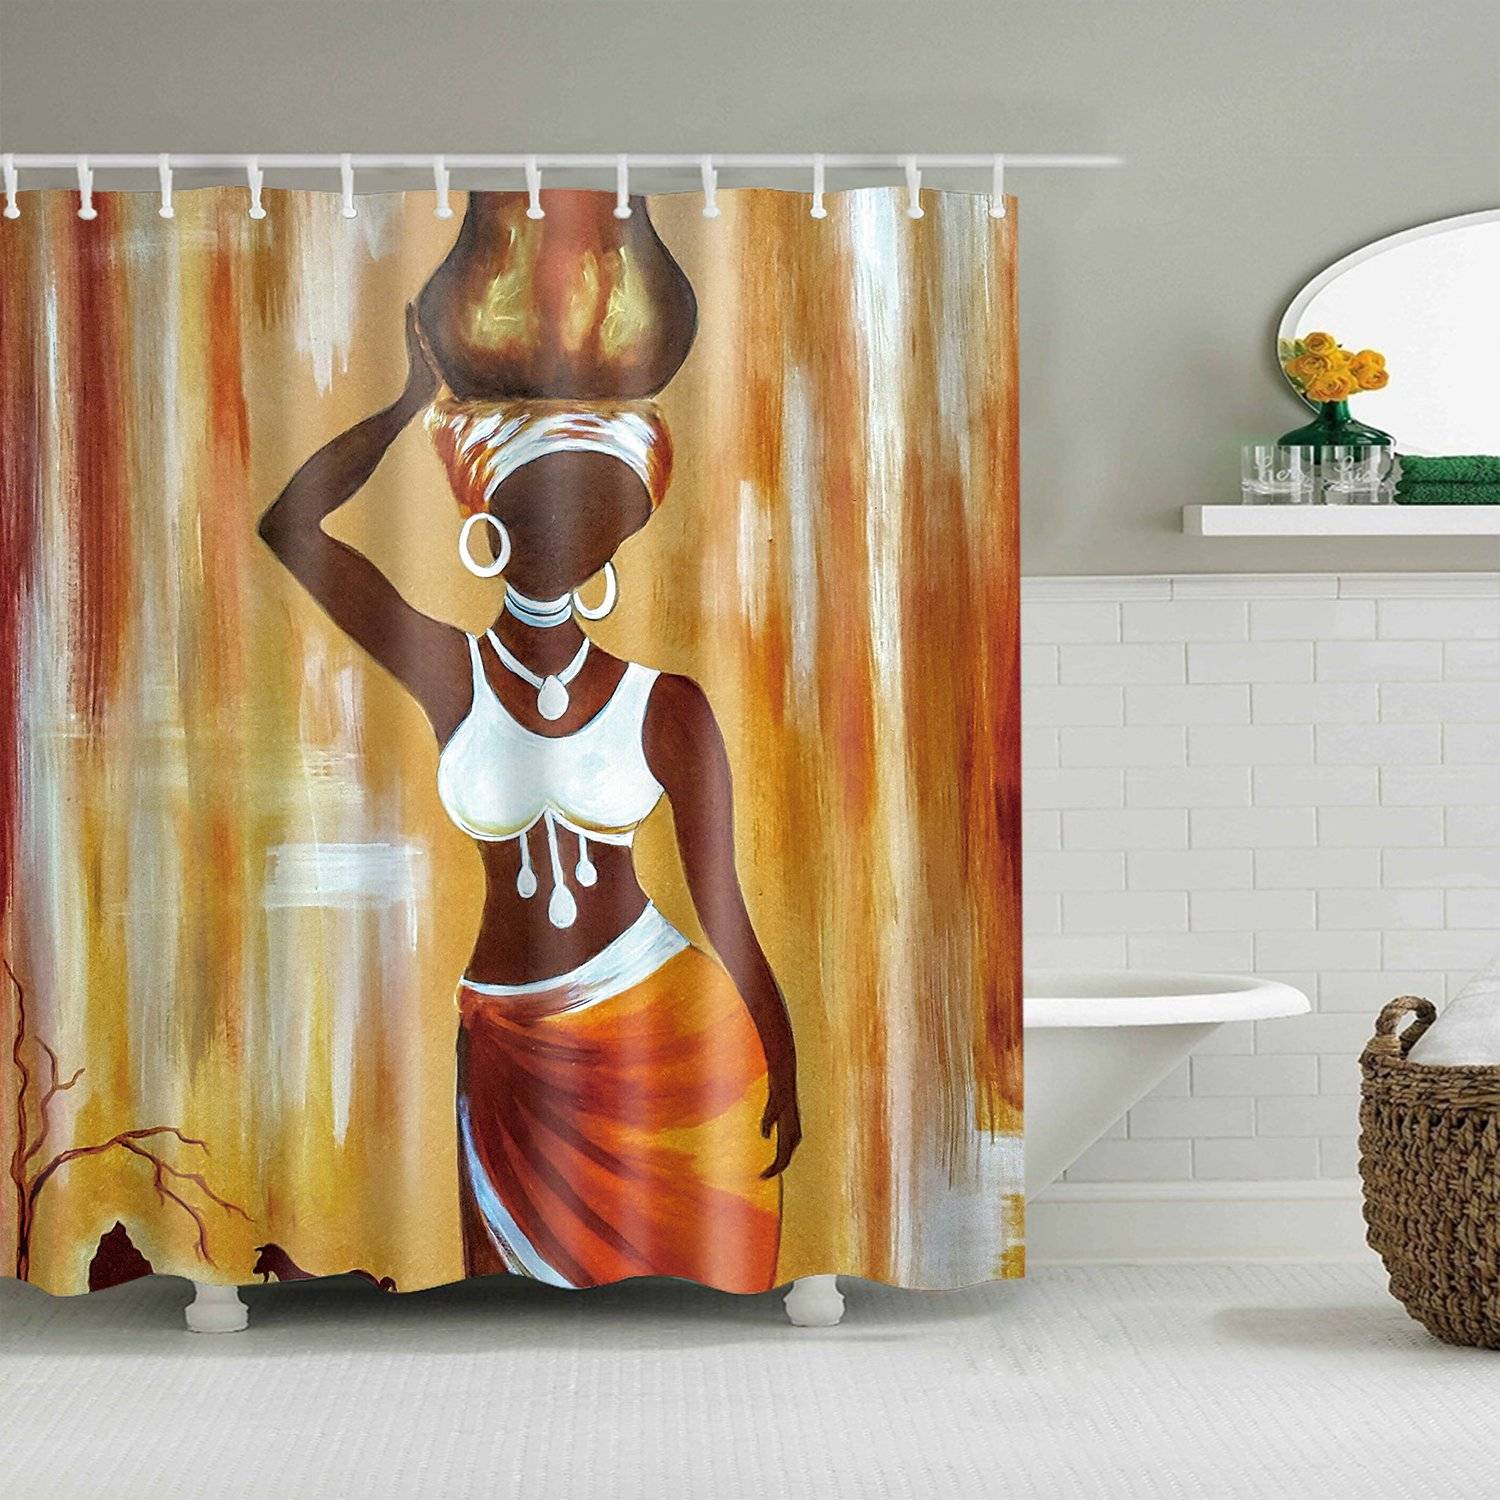 Fascinating Mural Woman Carrying Clay Pot African Shower Curtain